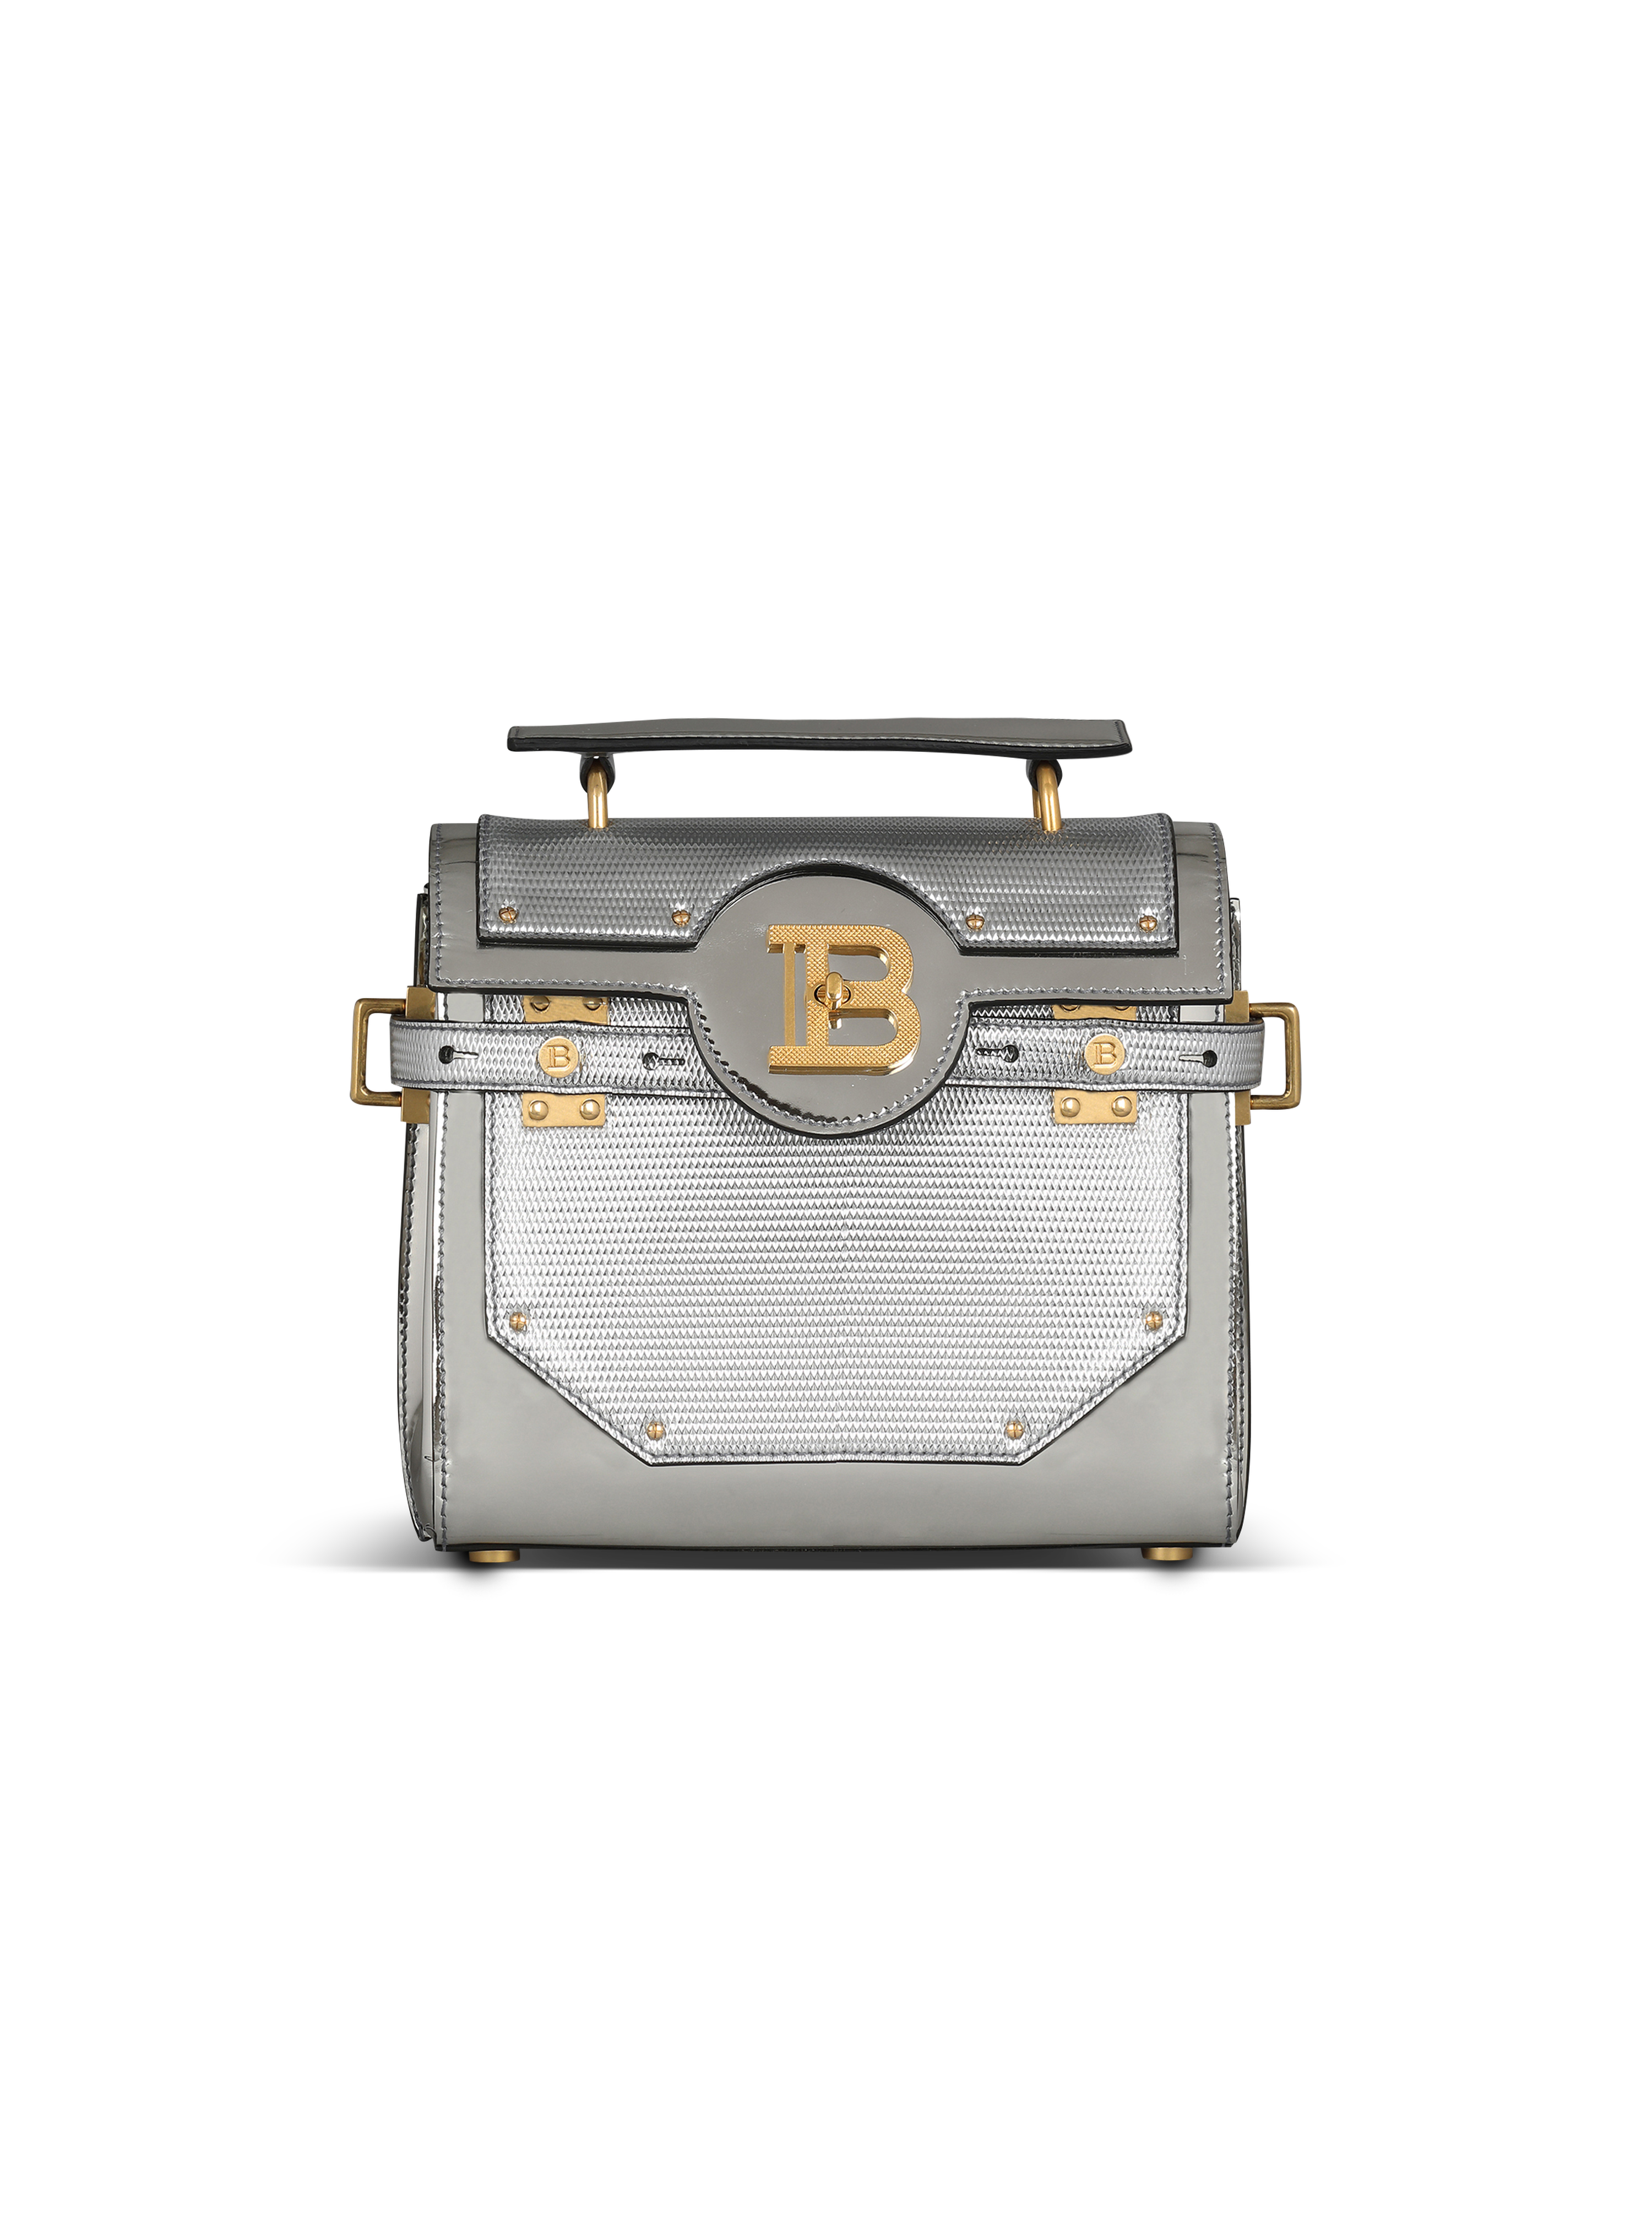 B-Buzz 23 bag in mirror-effect leather, silver